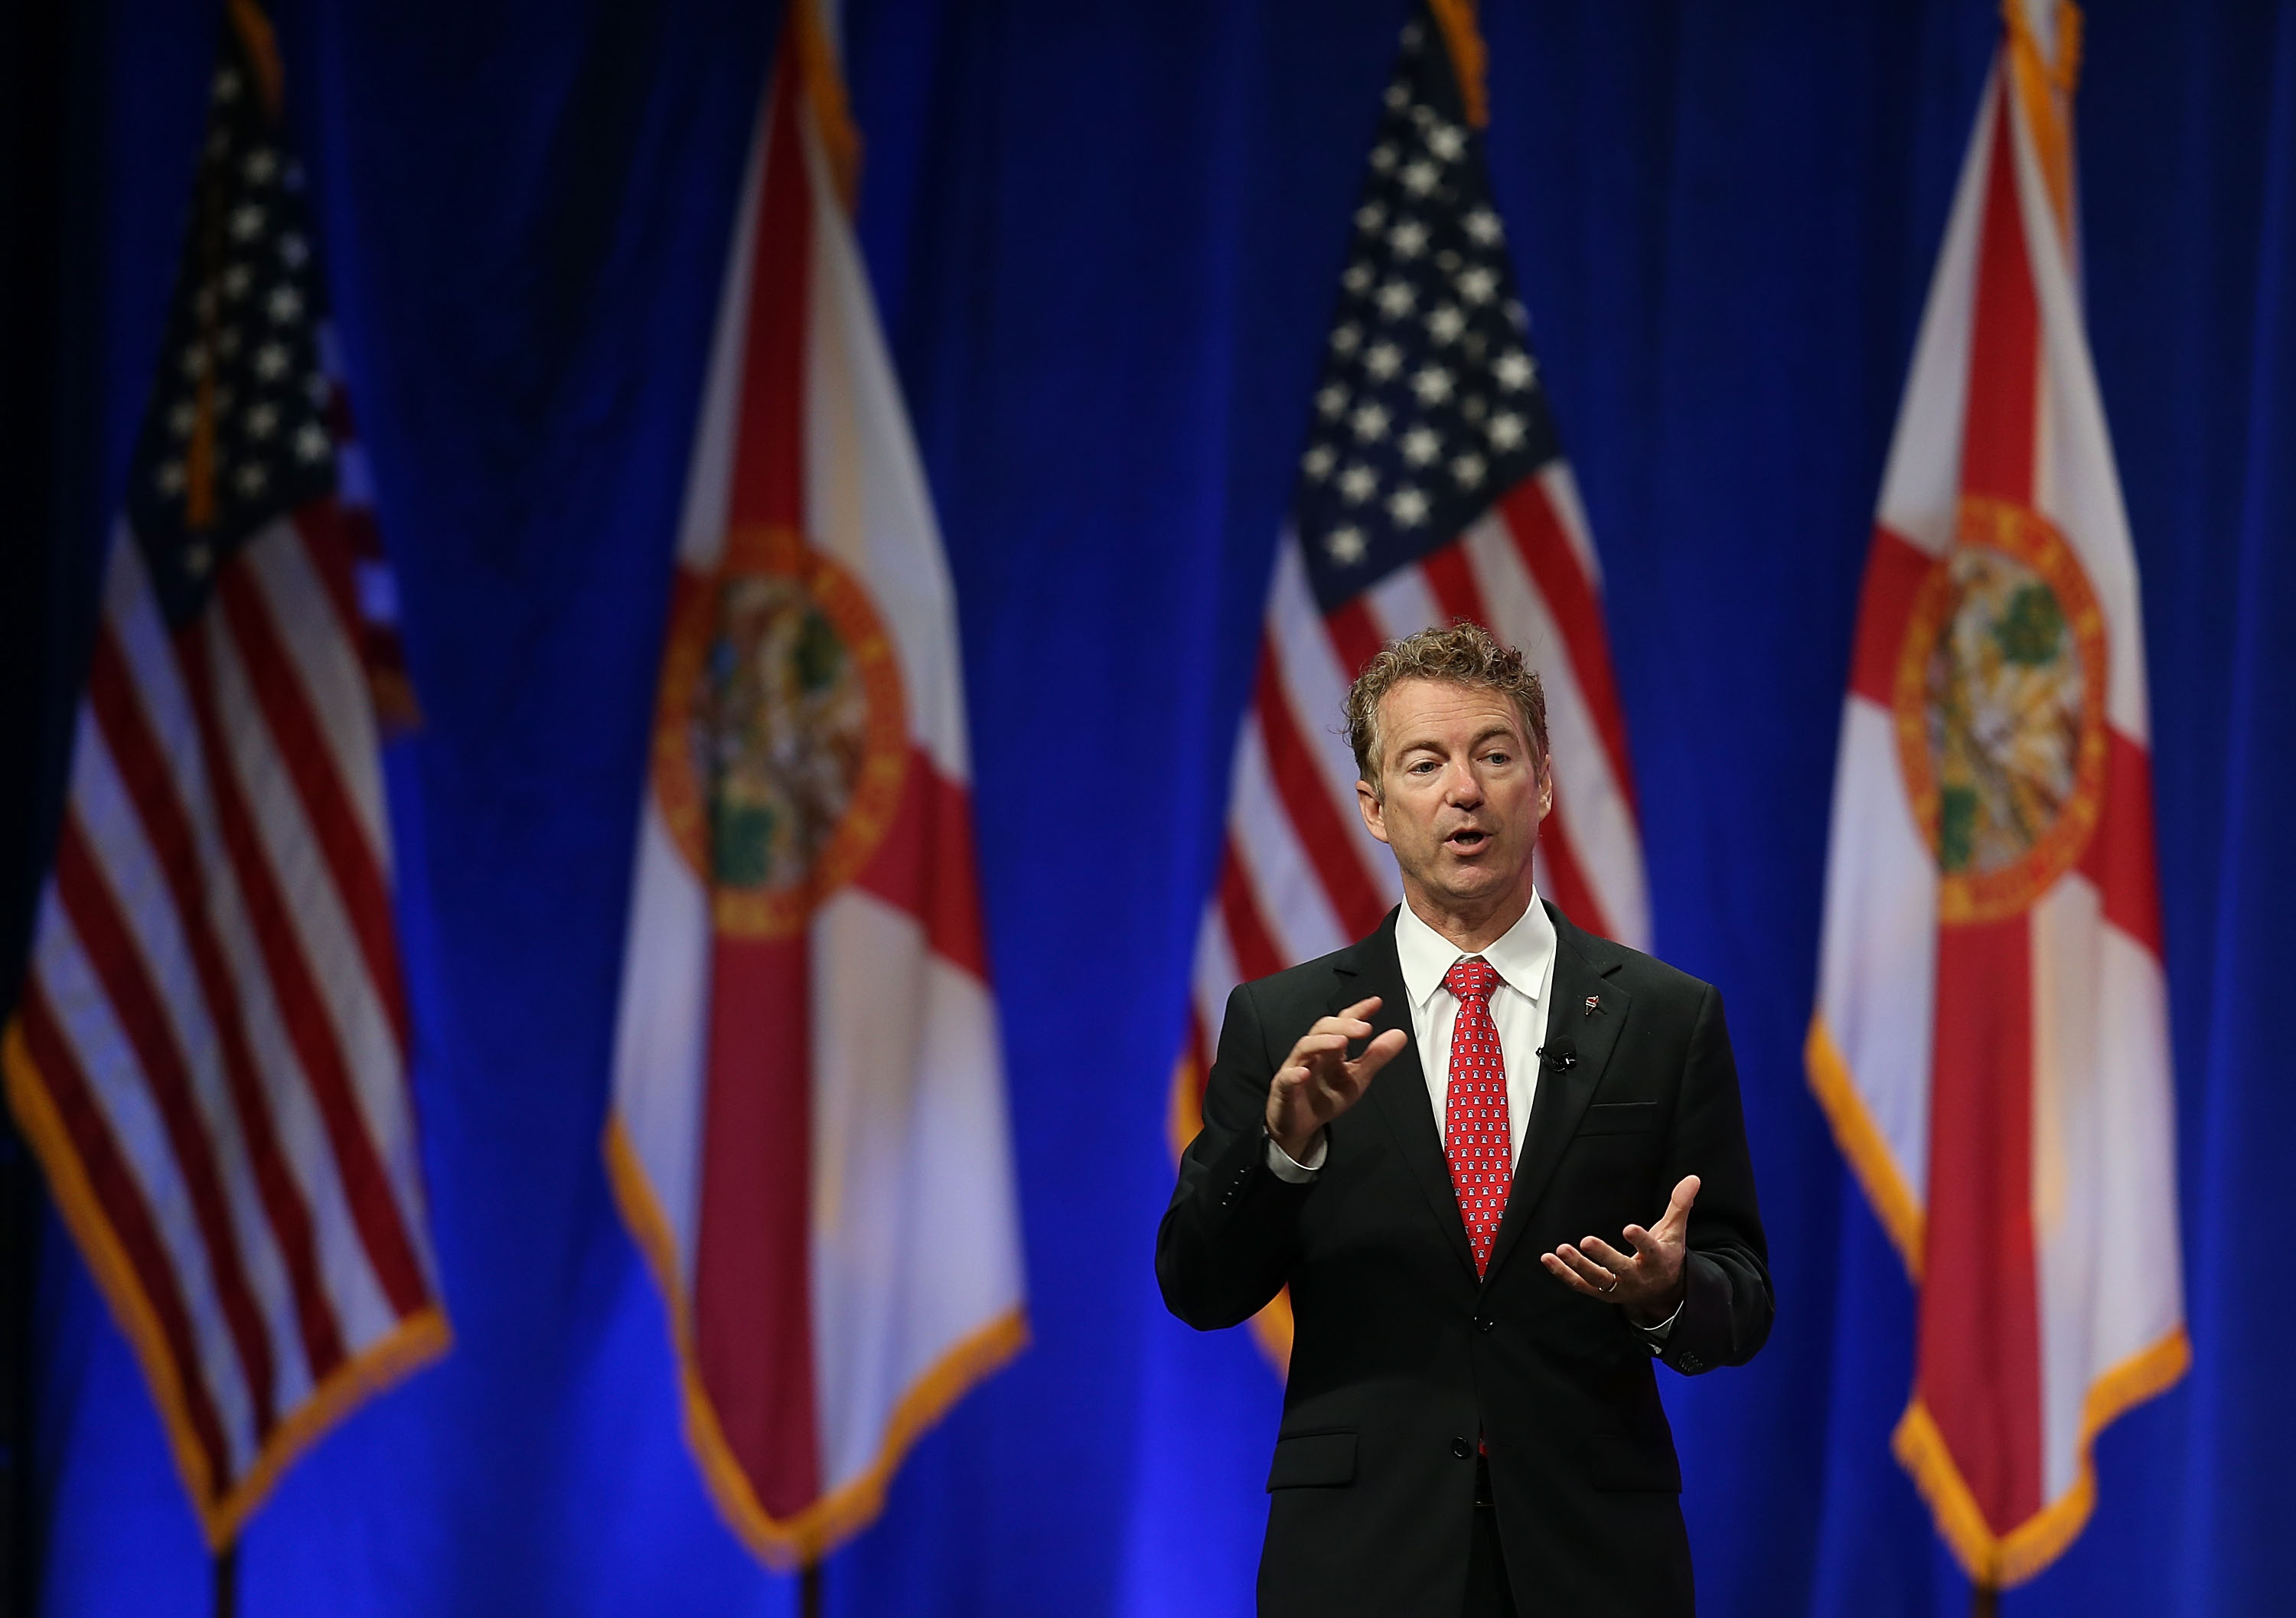 Republican presidential candidate Sen. Rand Paul (R-KY)  speaks during the Sunshine Summit conference being held at the Rosen Shingle Creek in Orlando, Florida, on Nov. 14, 2015. (Joe Raedle—Getty Images)